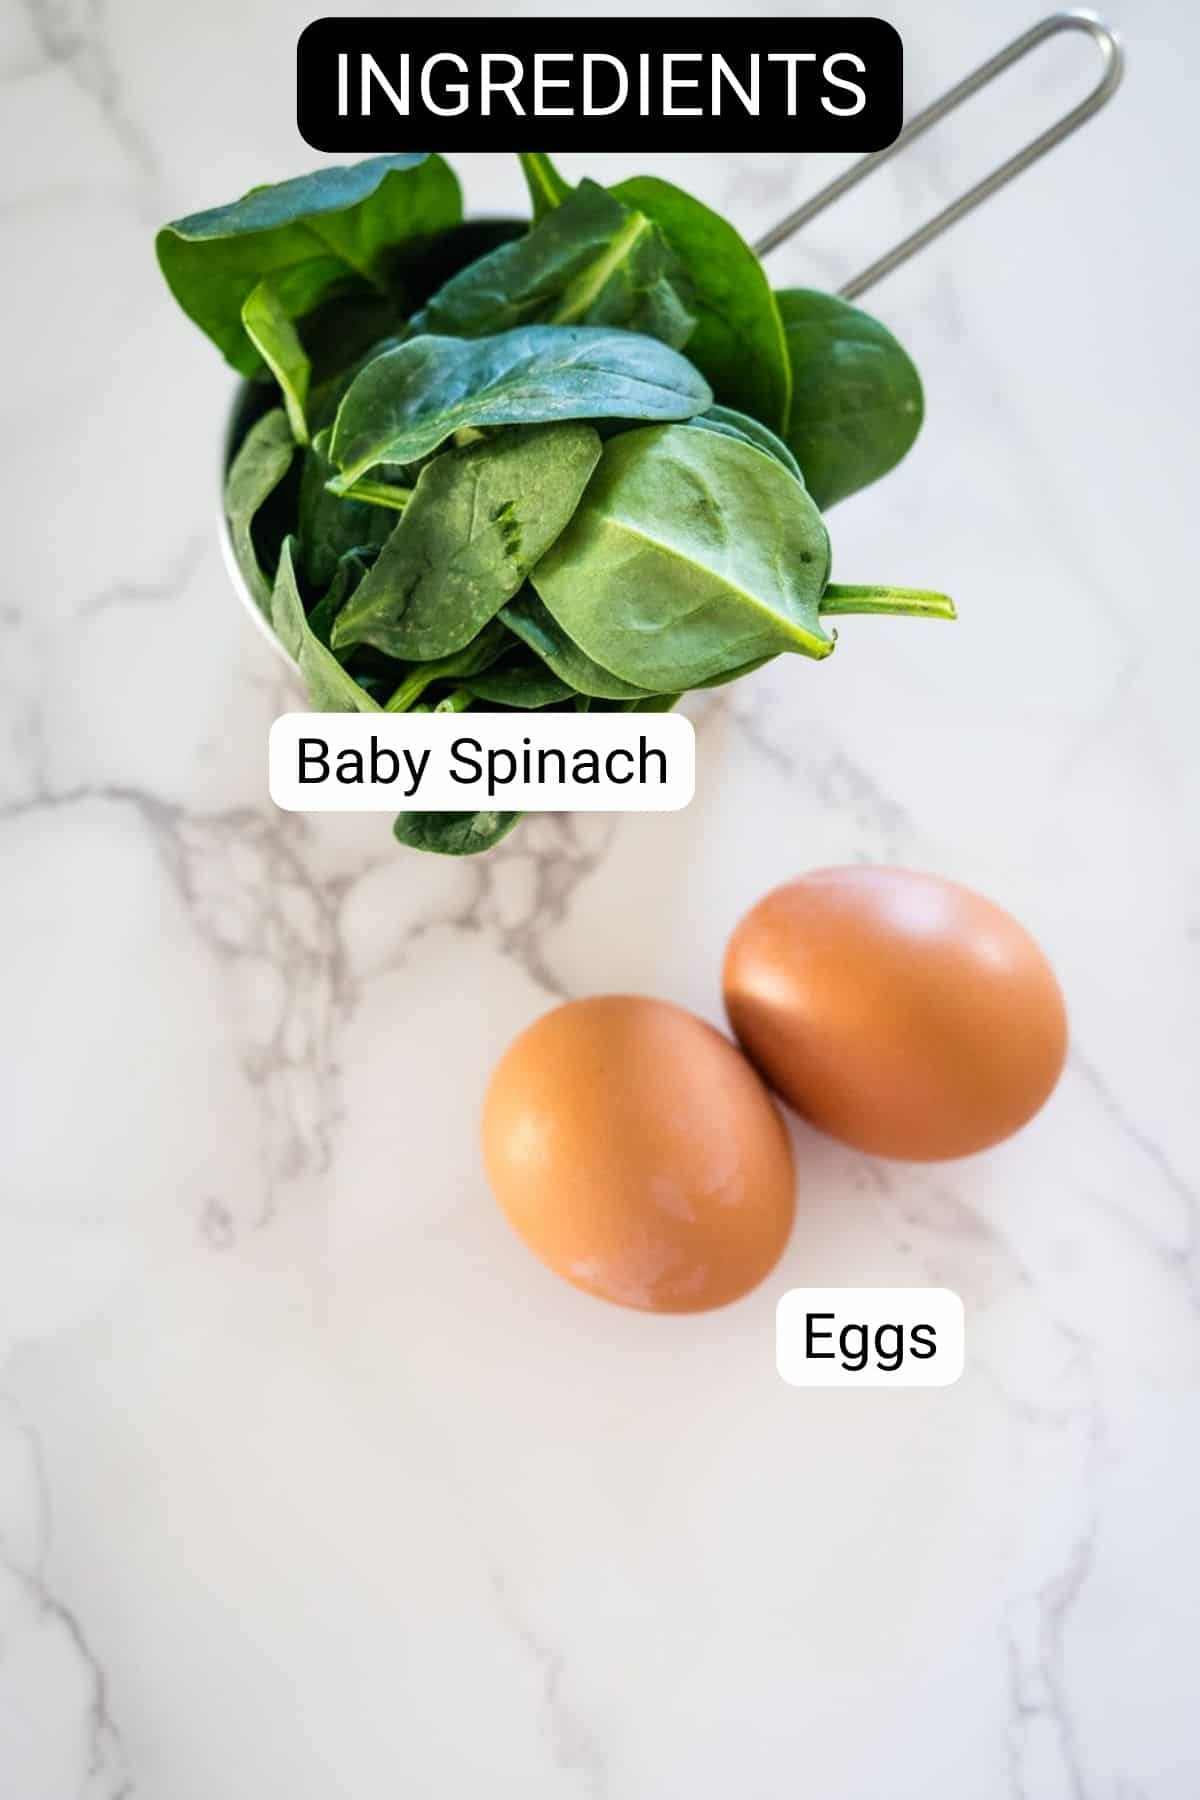 Ingredients for baby spinach and eggs.